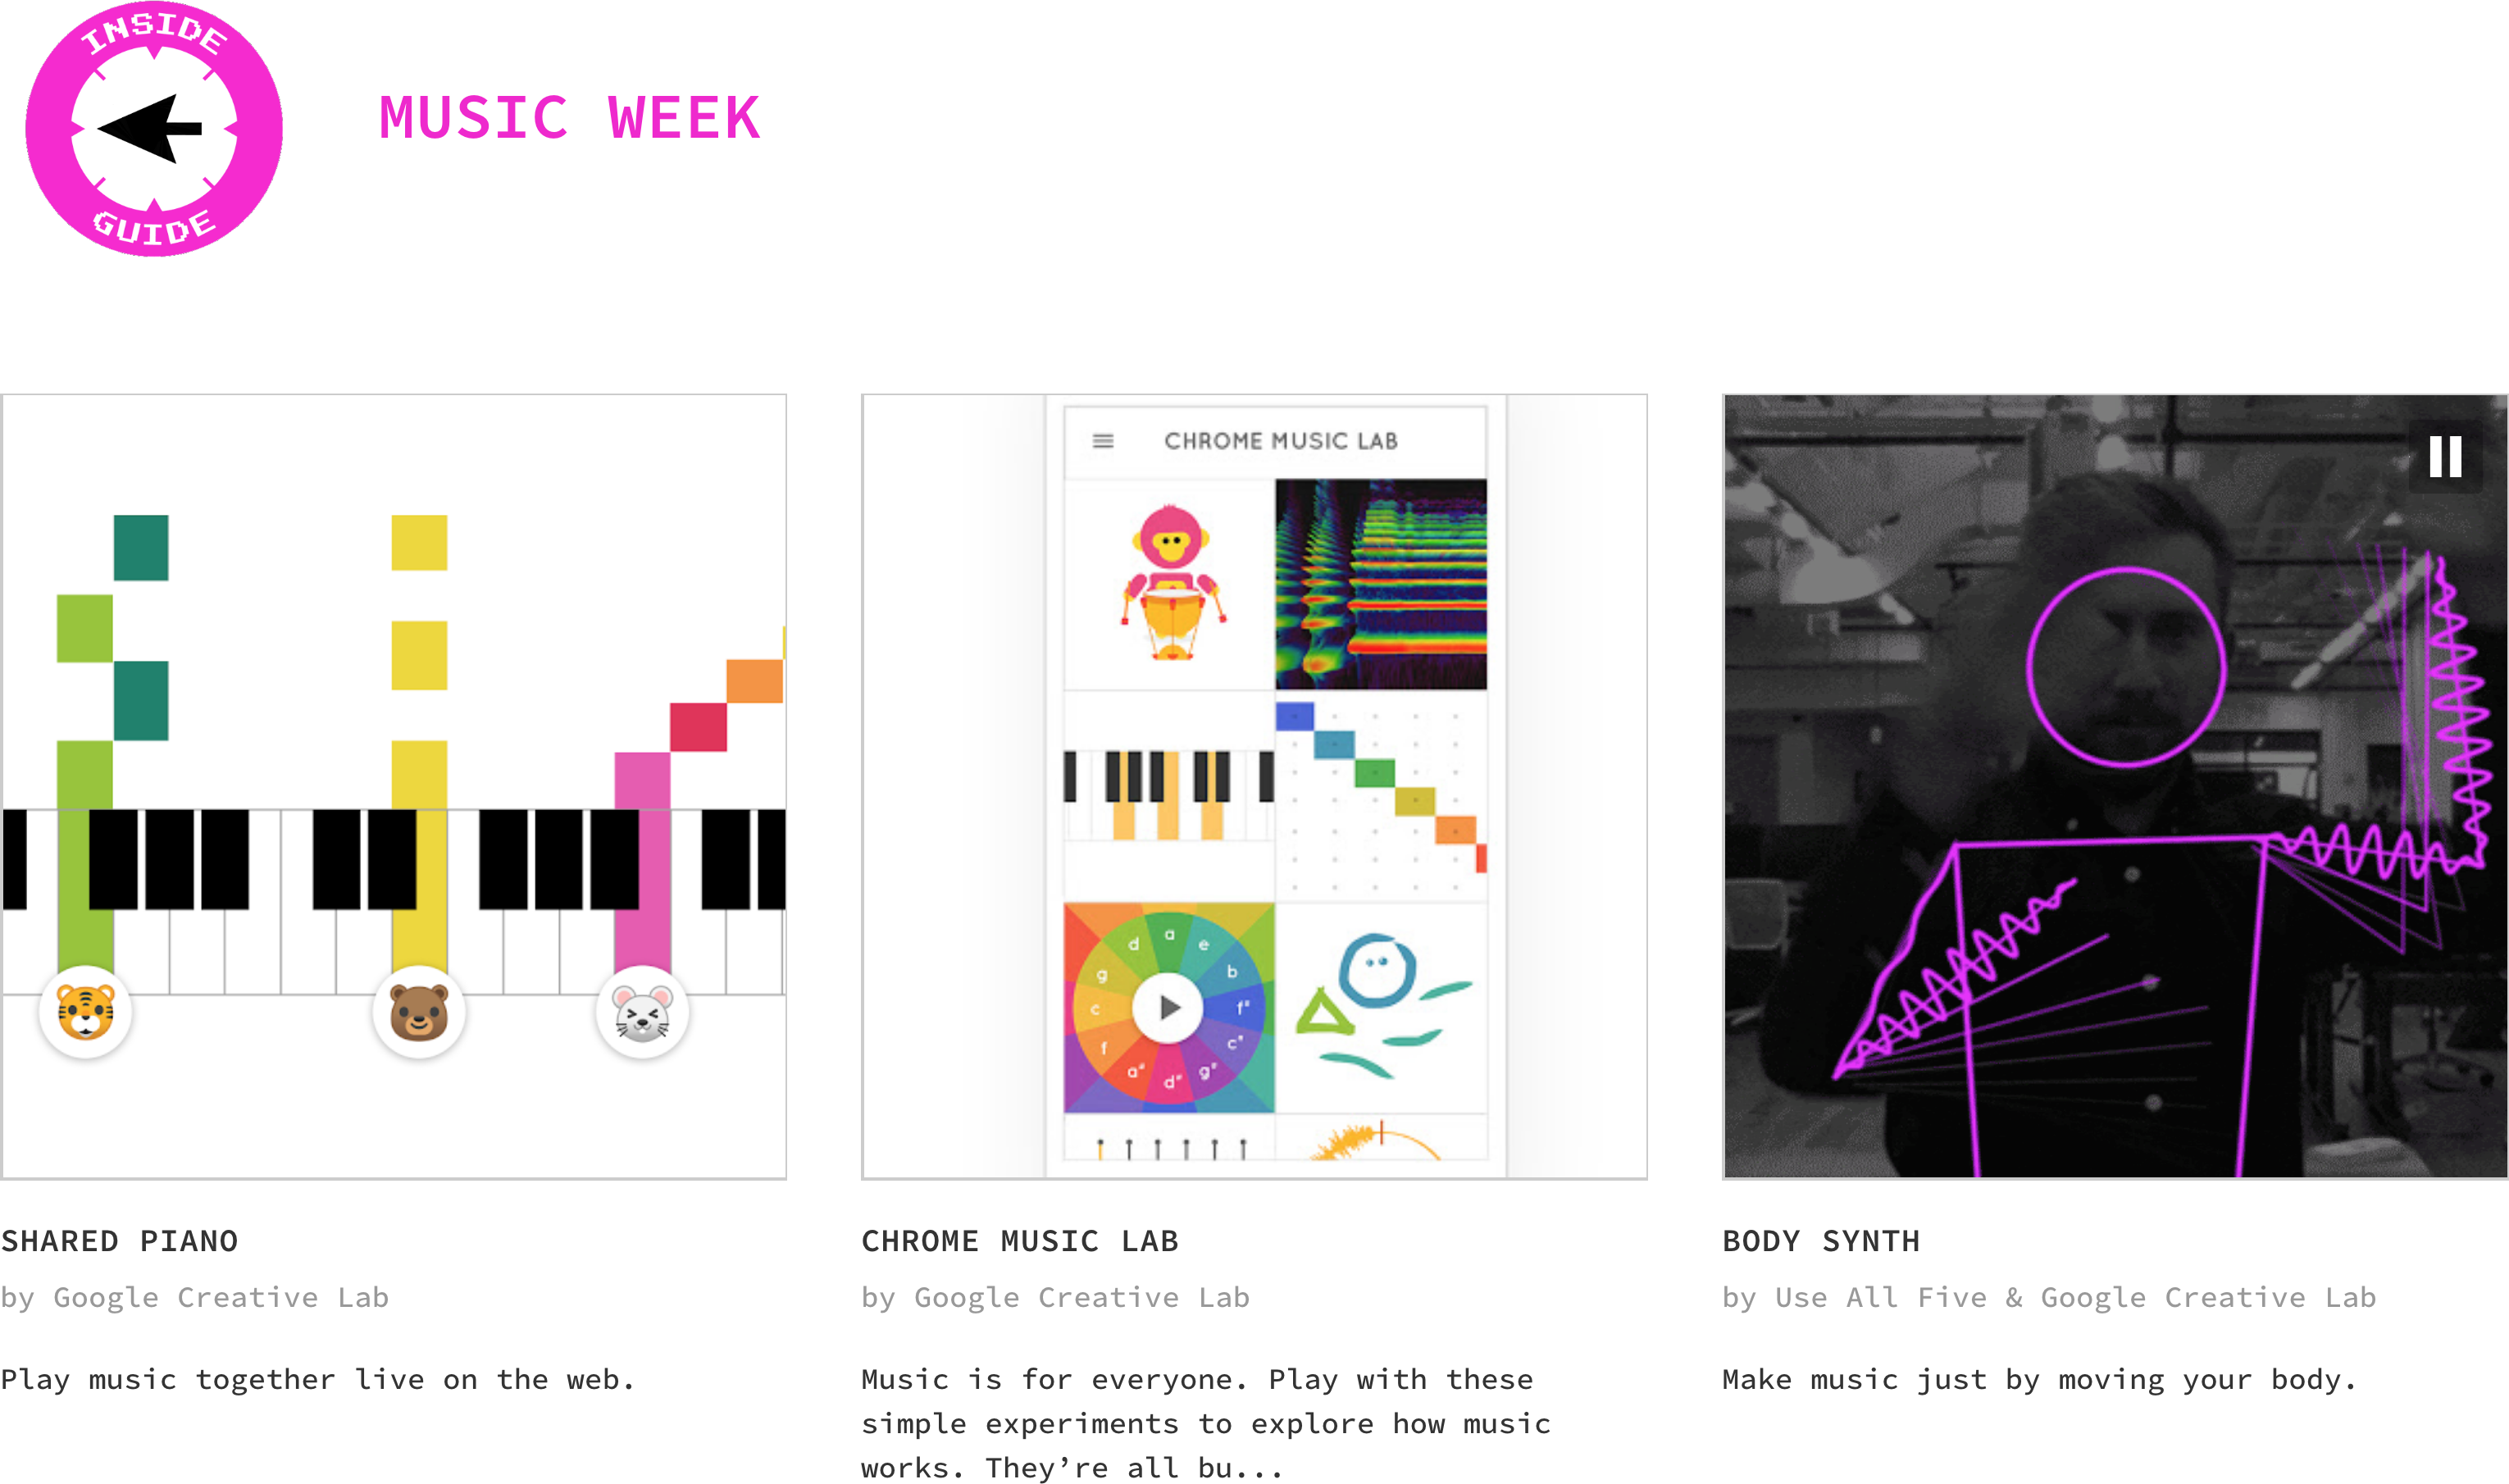 Google’s Music Week on Inside Guide gives you fun ways to play, collab and learn music